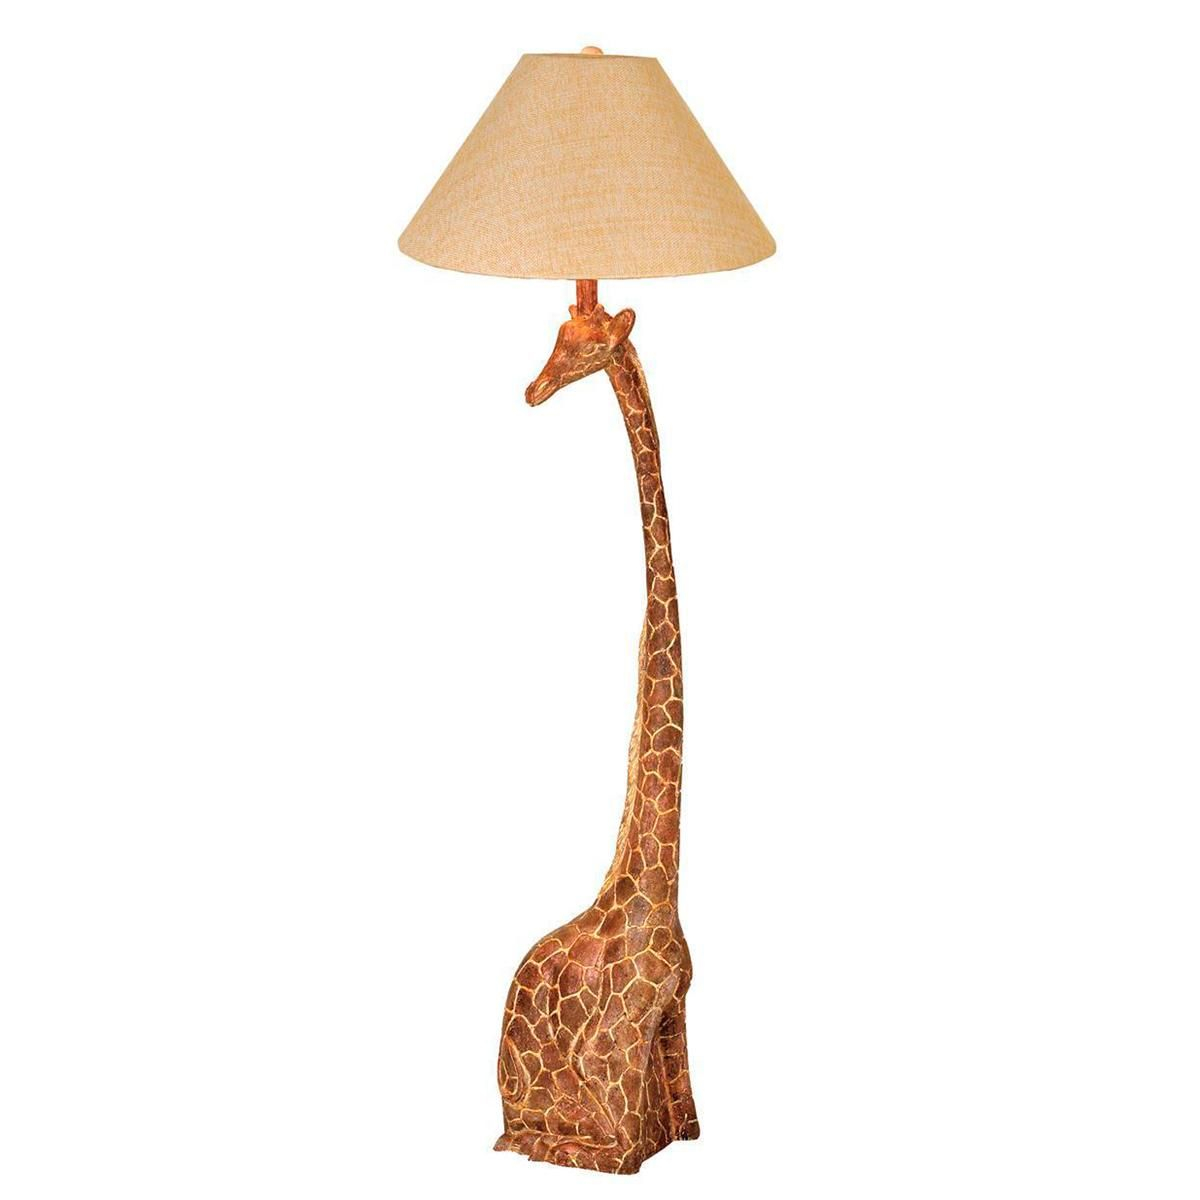 Giraffe Floor Lamp Cute For Nursery Bedroom Lamps Cool with regard to sizing 1200 X 1200